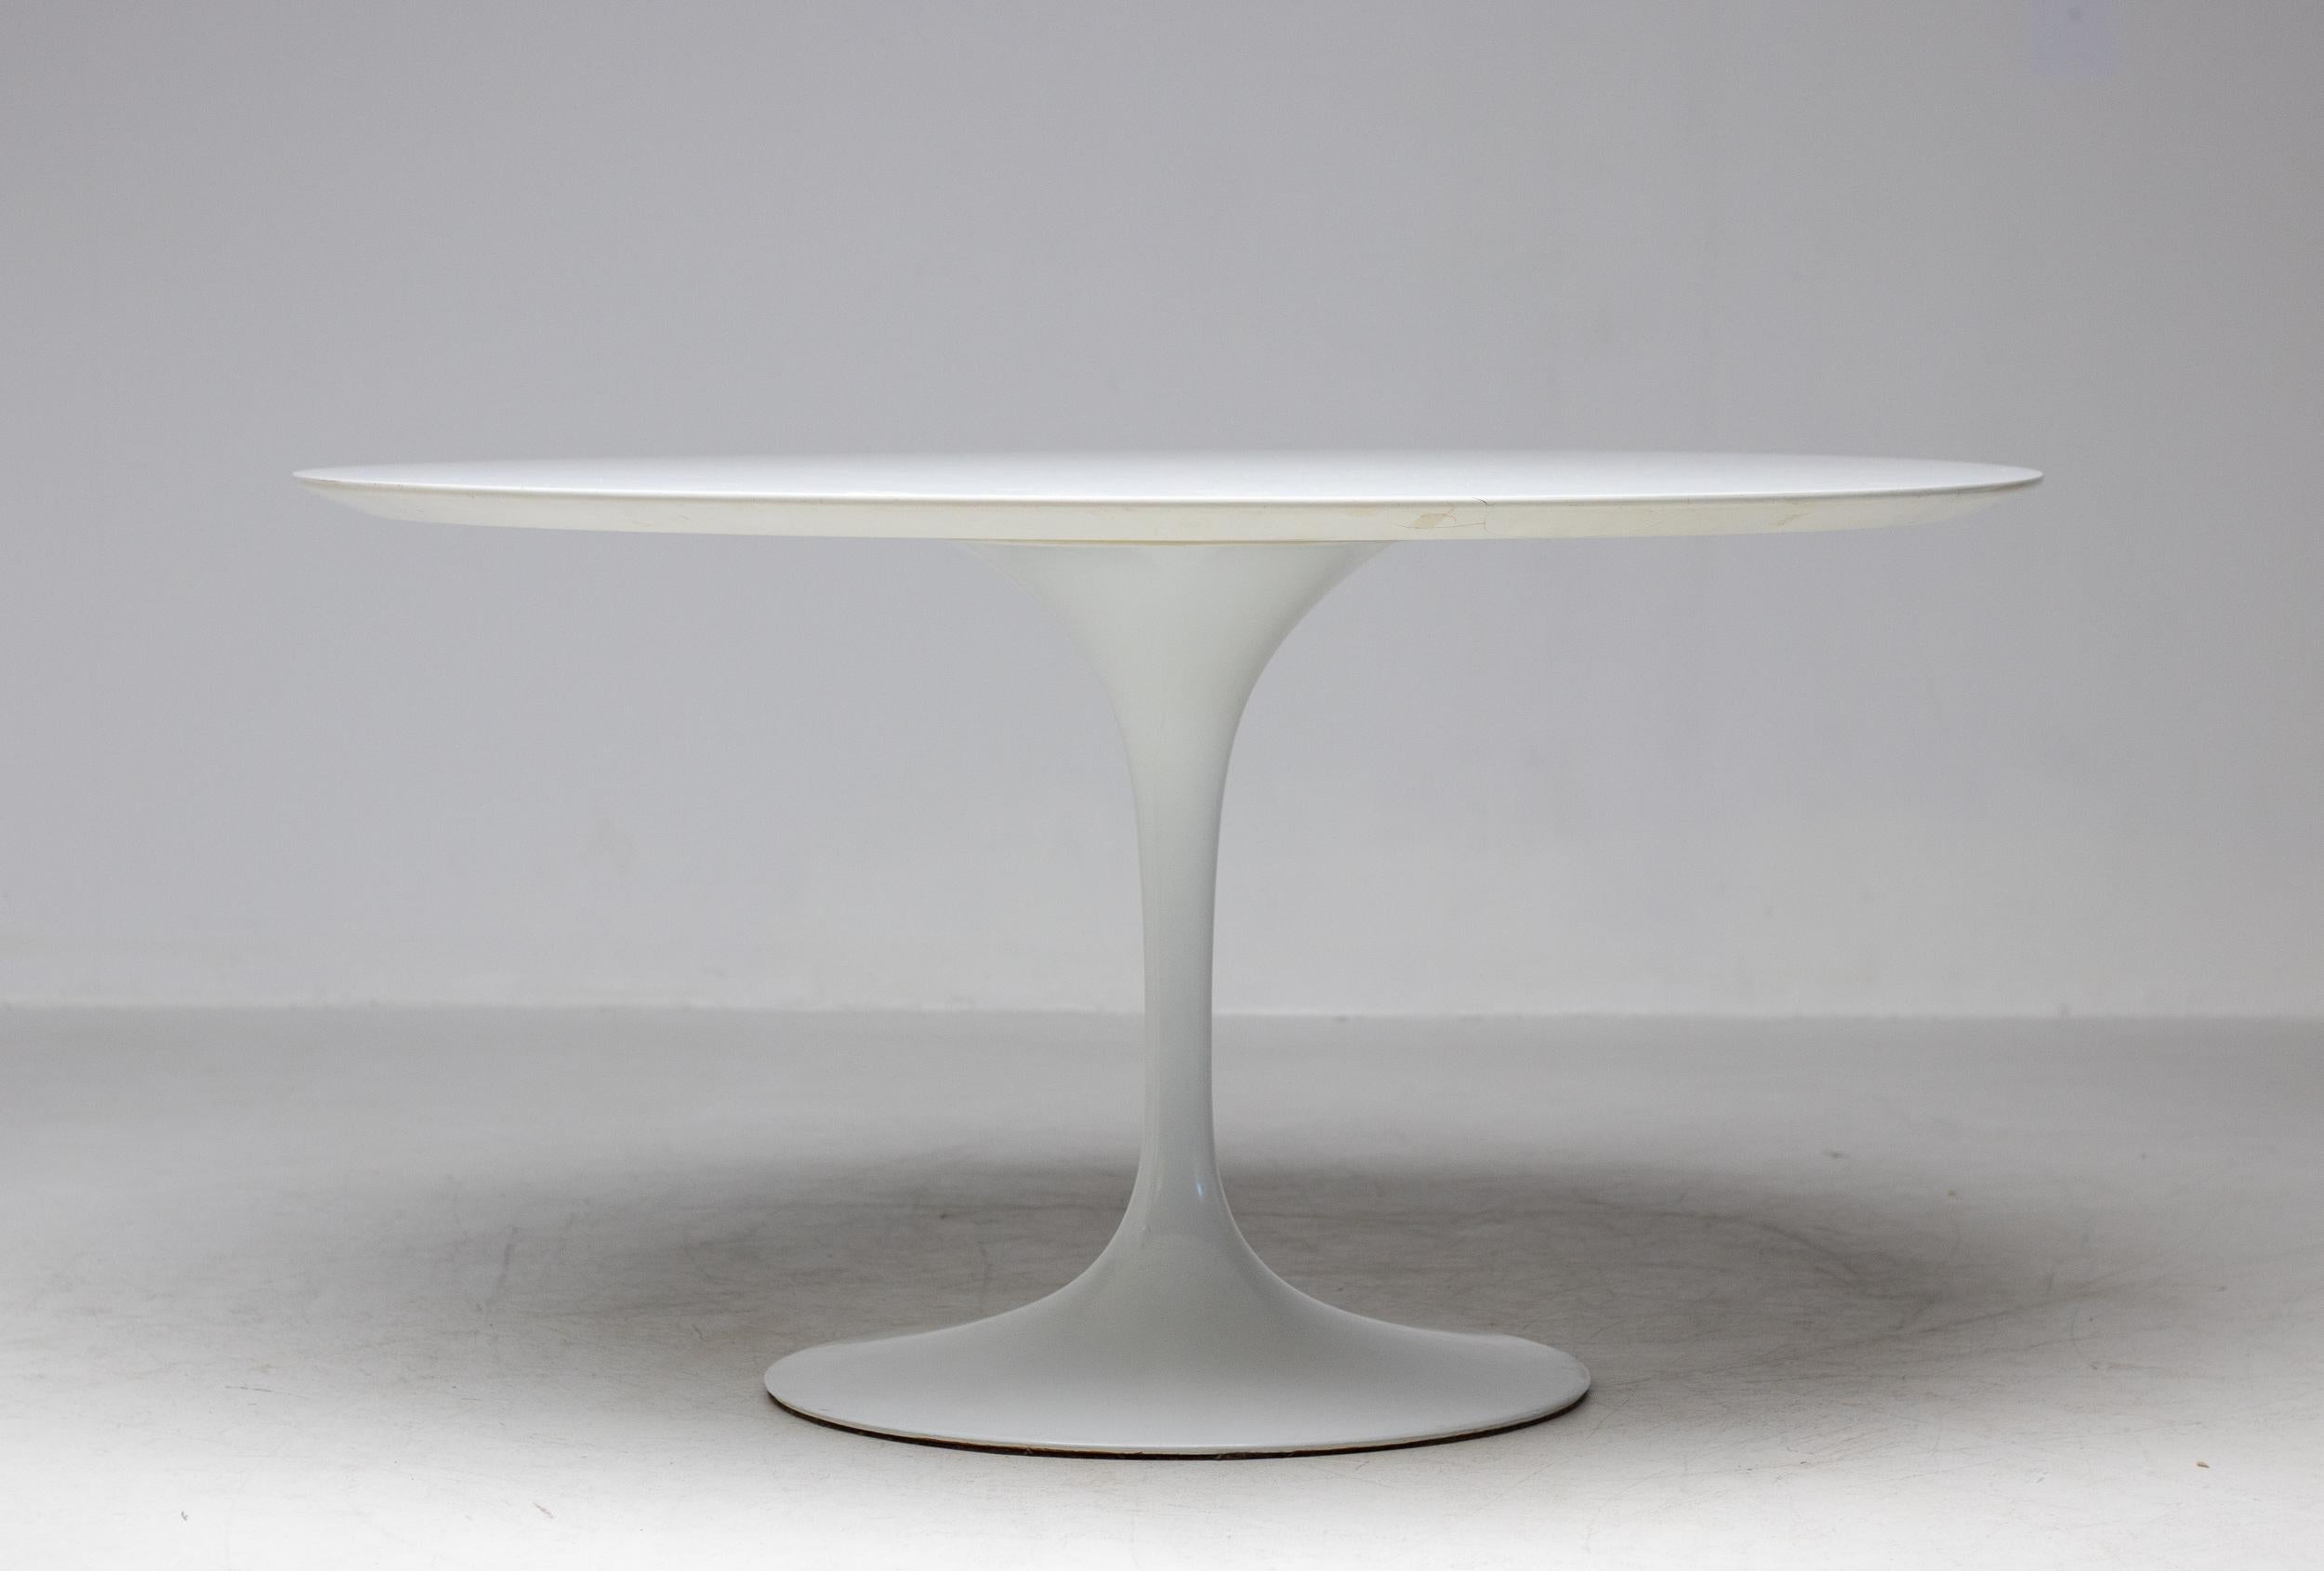 Classic large white Tulip dining table designed by Eero Saarinen for Knoll International.
A defining accomplishment of modern design and a timeless addition to your home—a true Classic.
Logo embossed in pedestal bottom. Knoll tag adhered to the